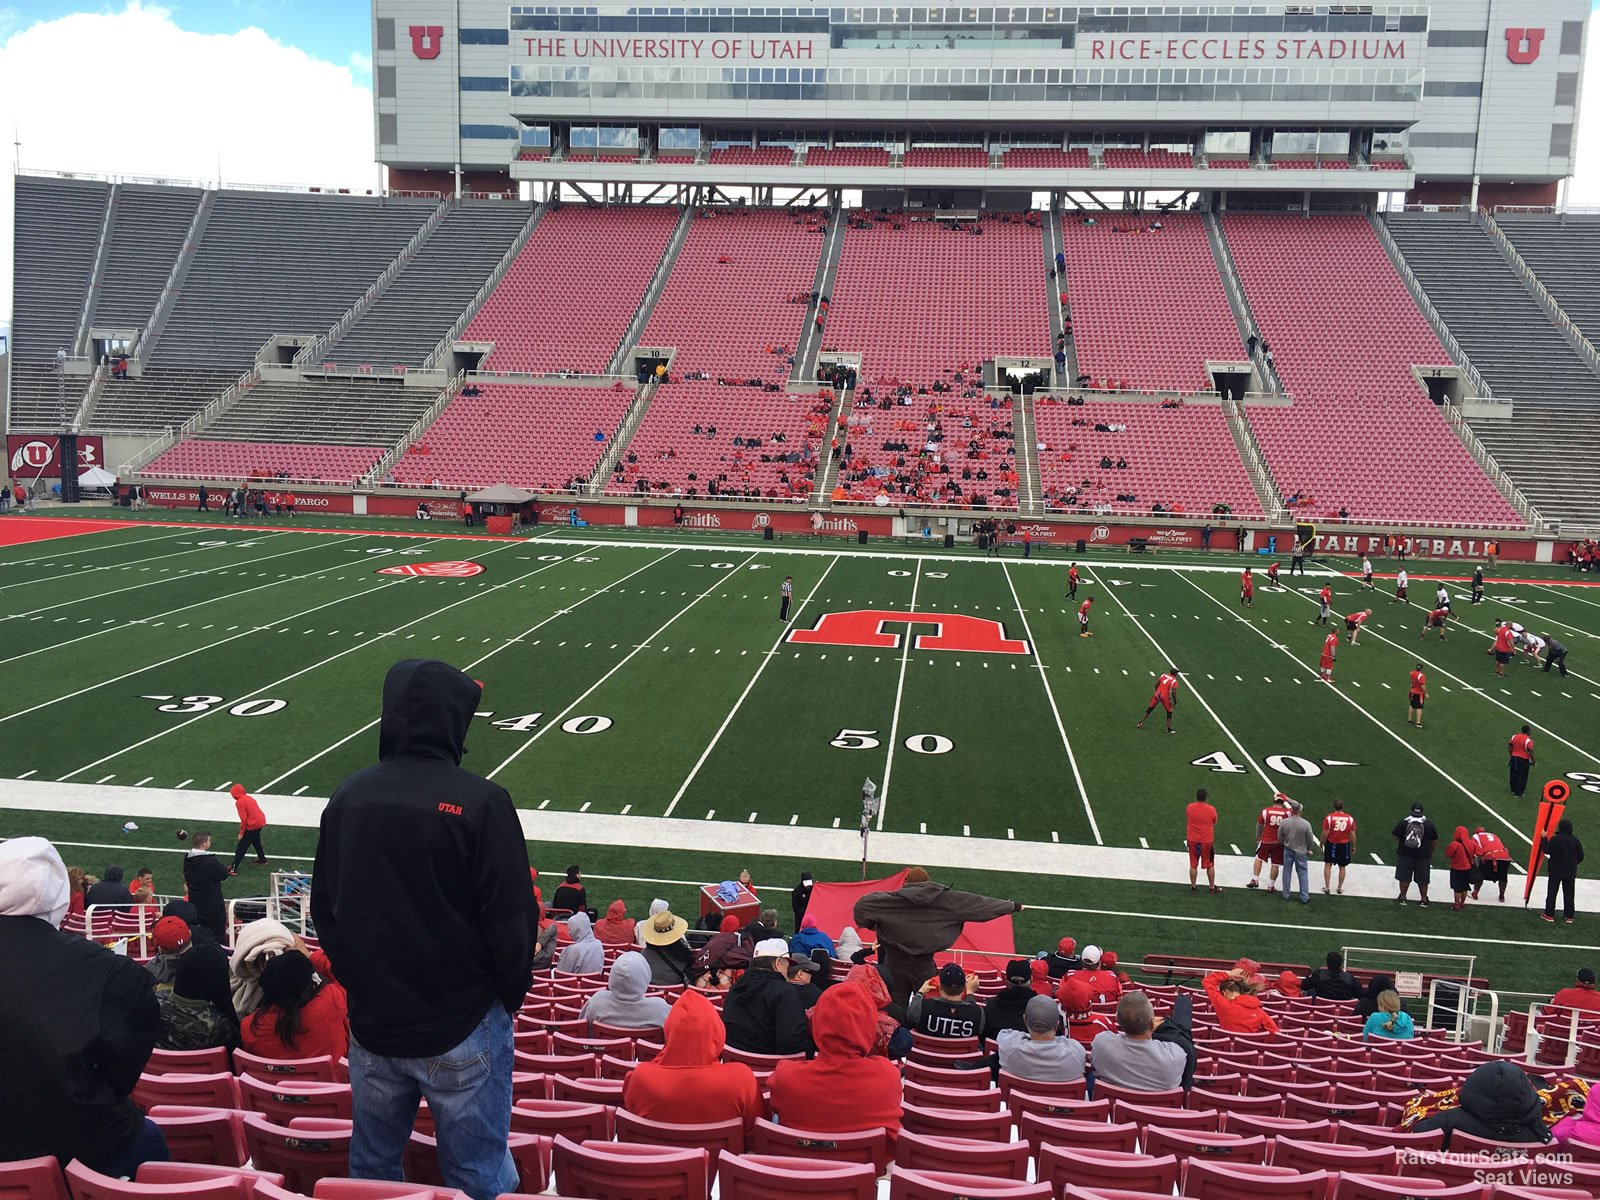 section e36, row 20 seat view  - rice-eccles stadium